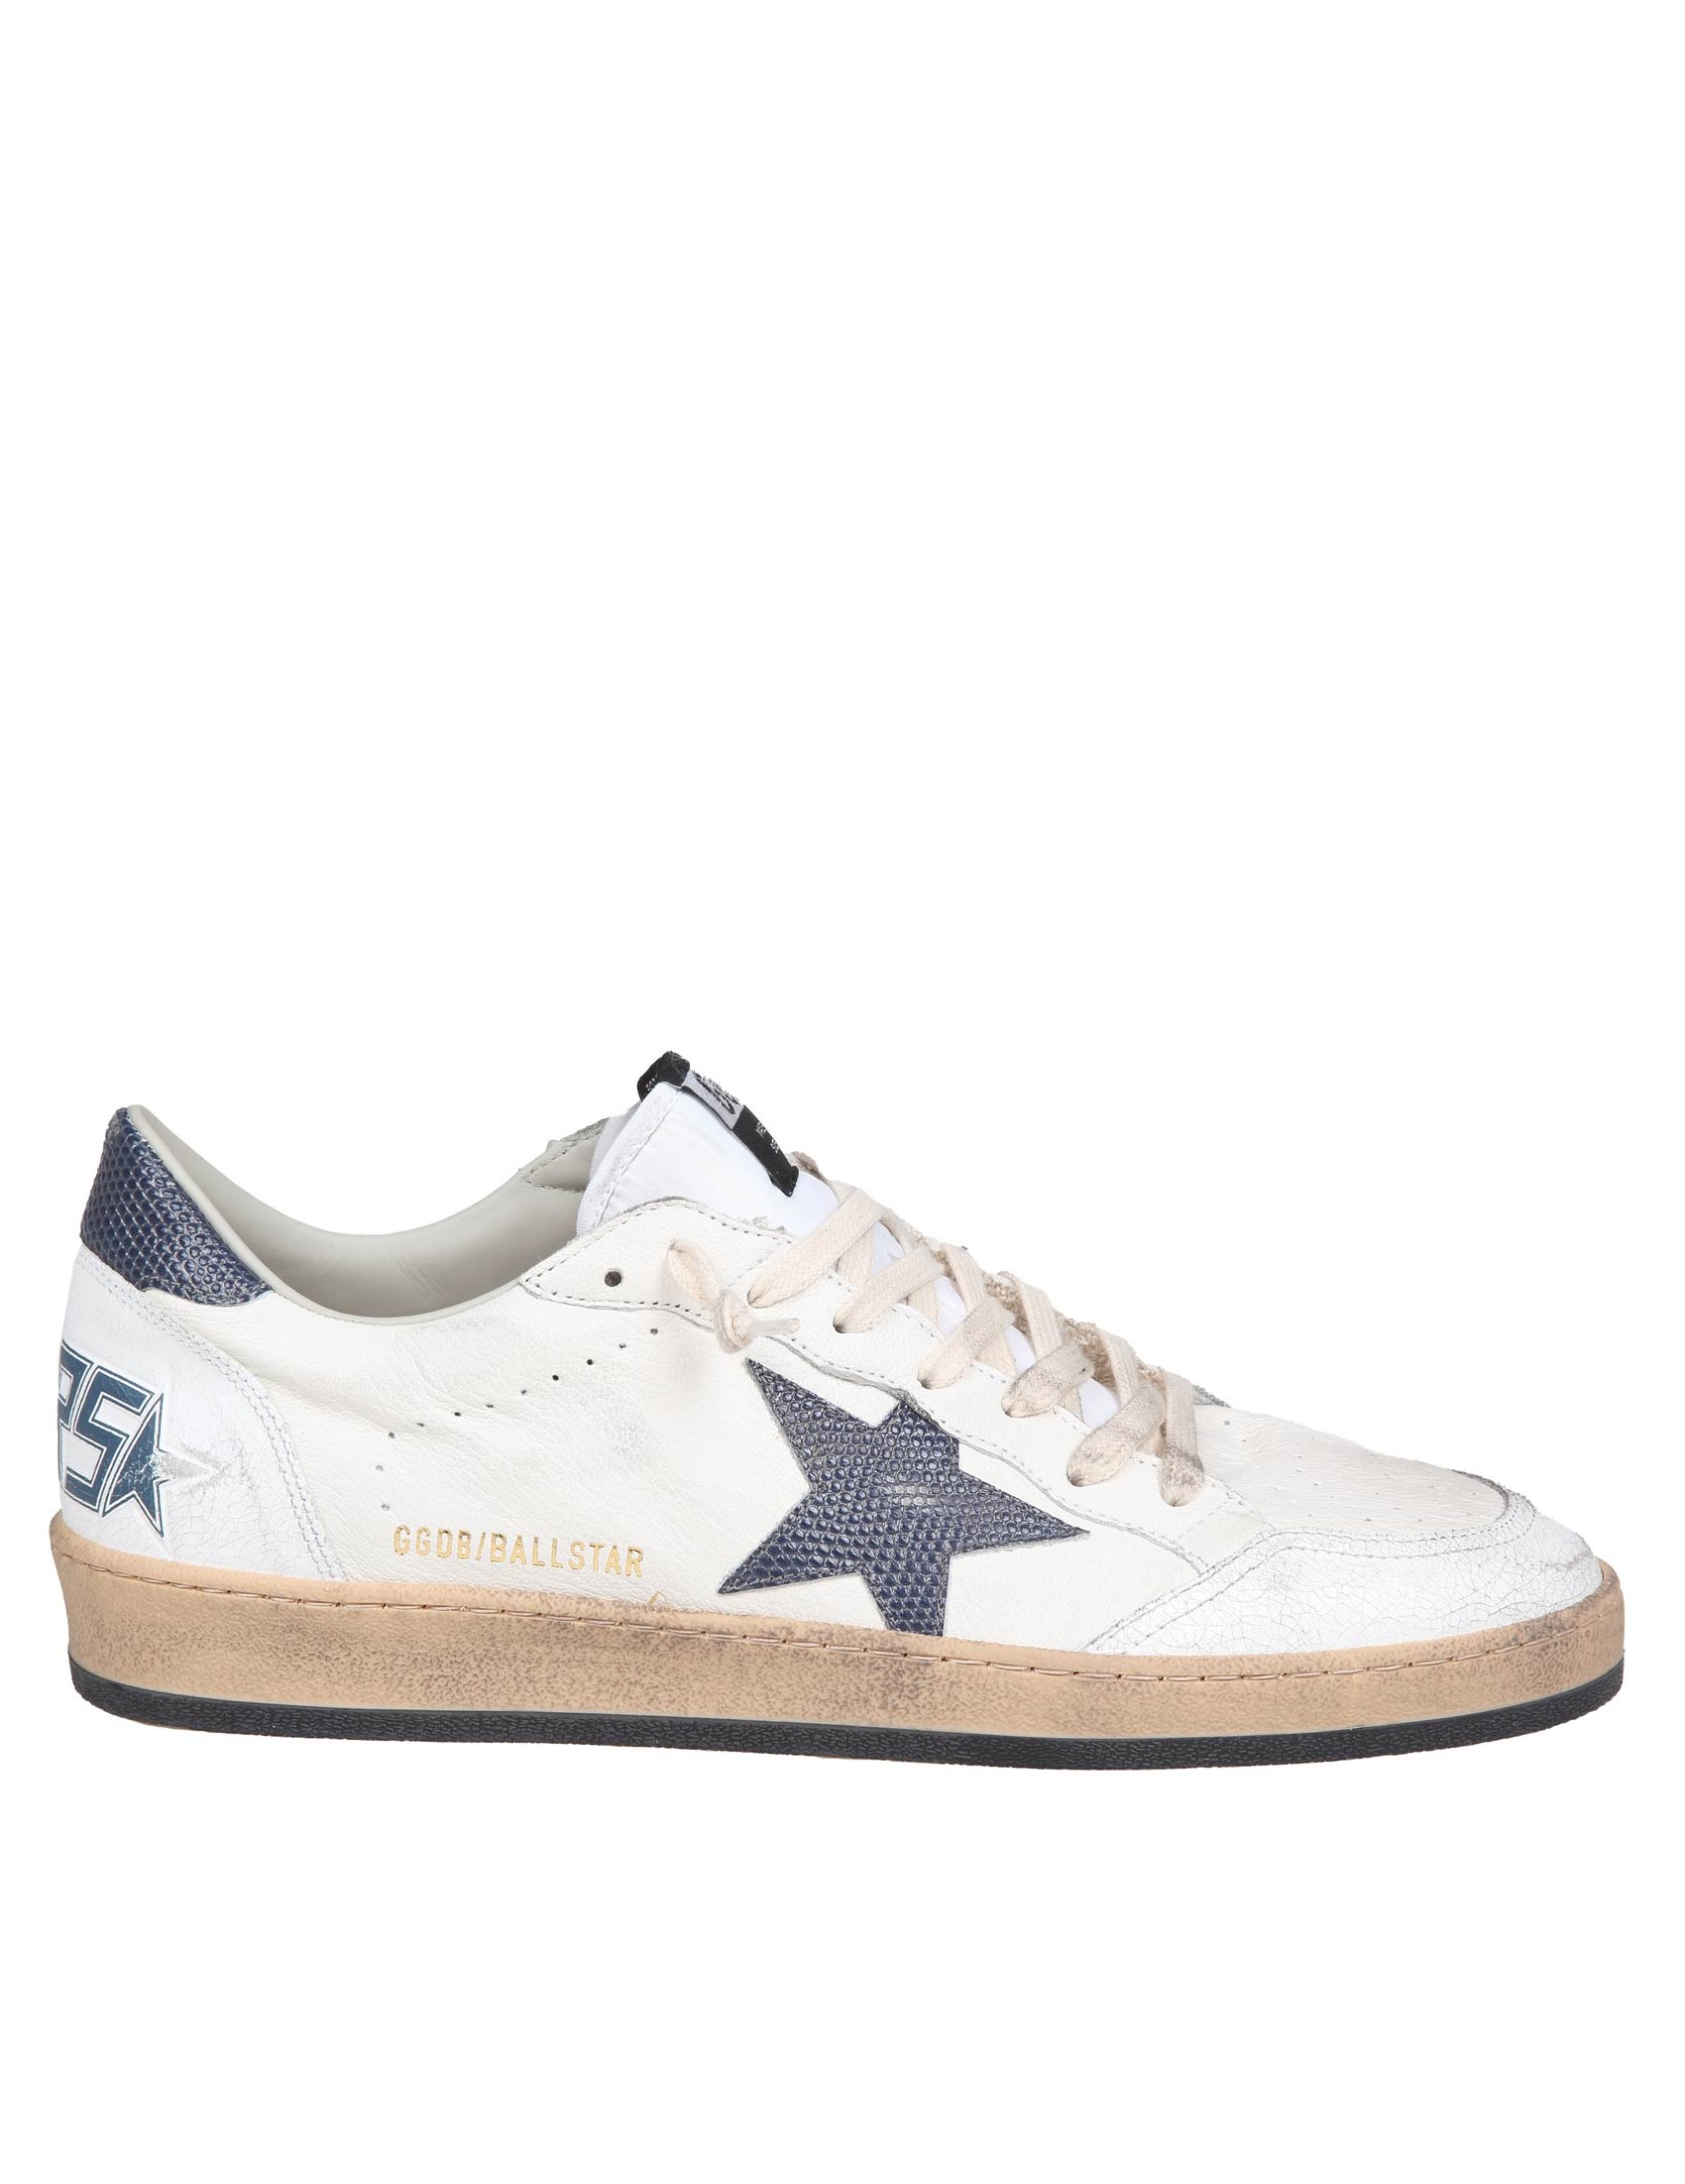 GOLDEN GOOSE BALL STAR IN NAPPA WITH LIZARD PRINT STAR